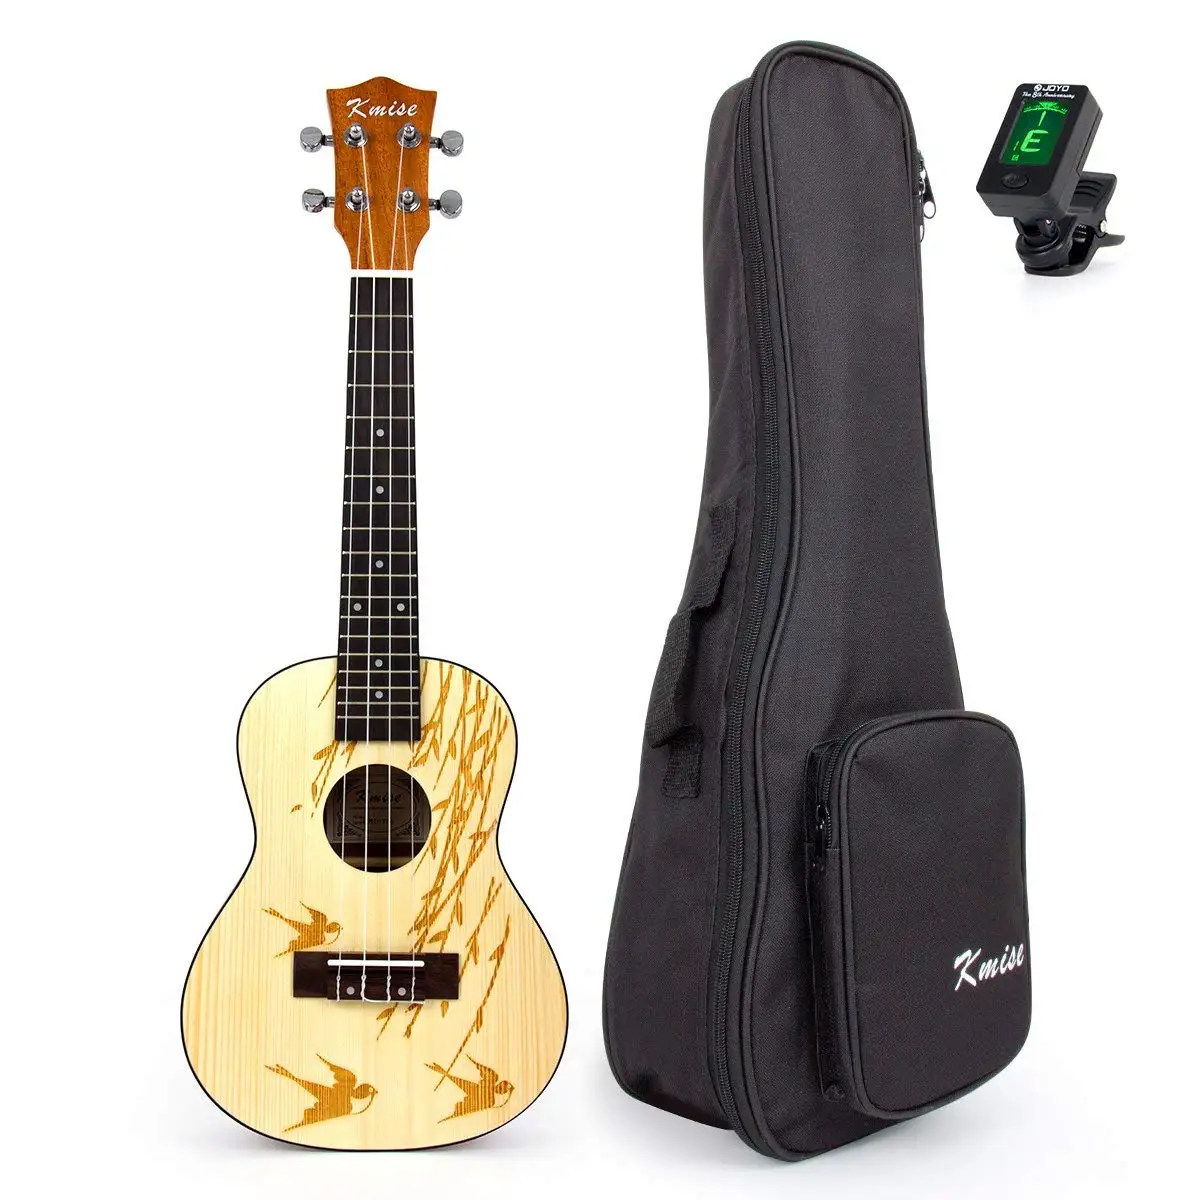 Cheap Solid Body Ukulele, find Solid Body Ukulele deals on line at www.waterandnature.org